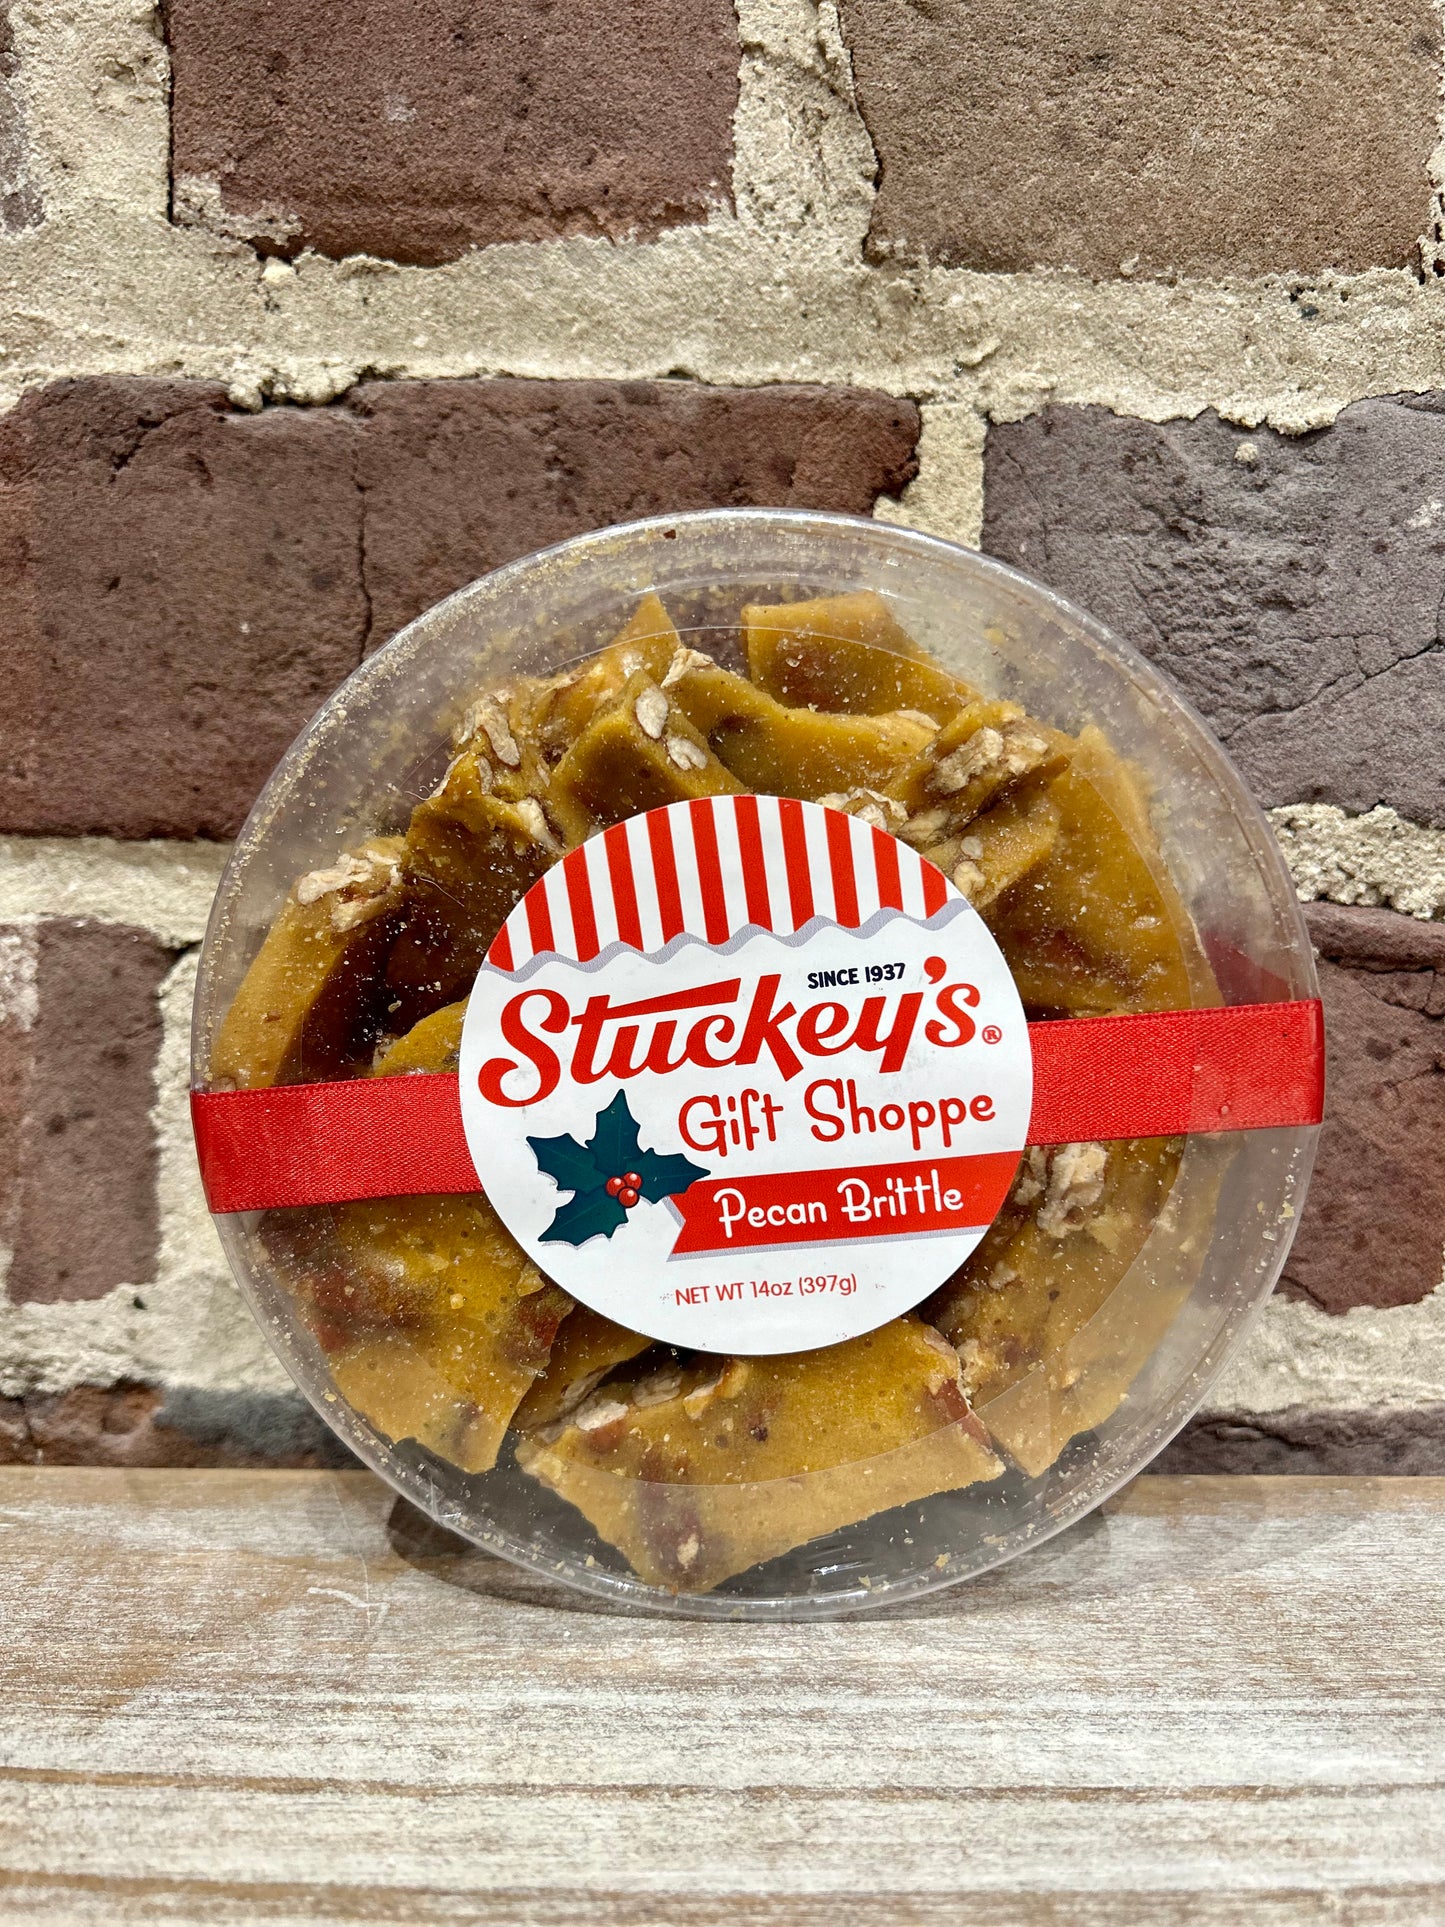 Stuckey's Pecan Brittle Holiday Gift Box  - Local Brand